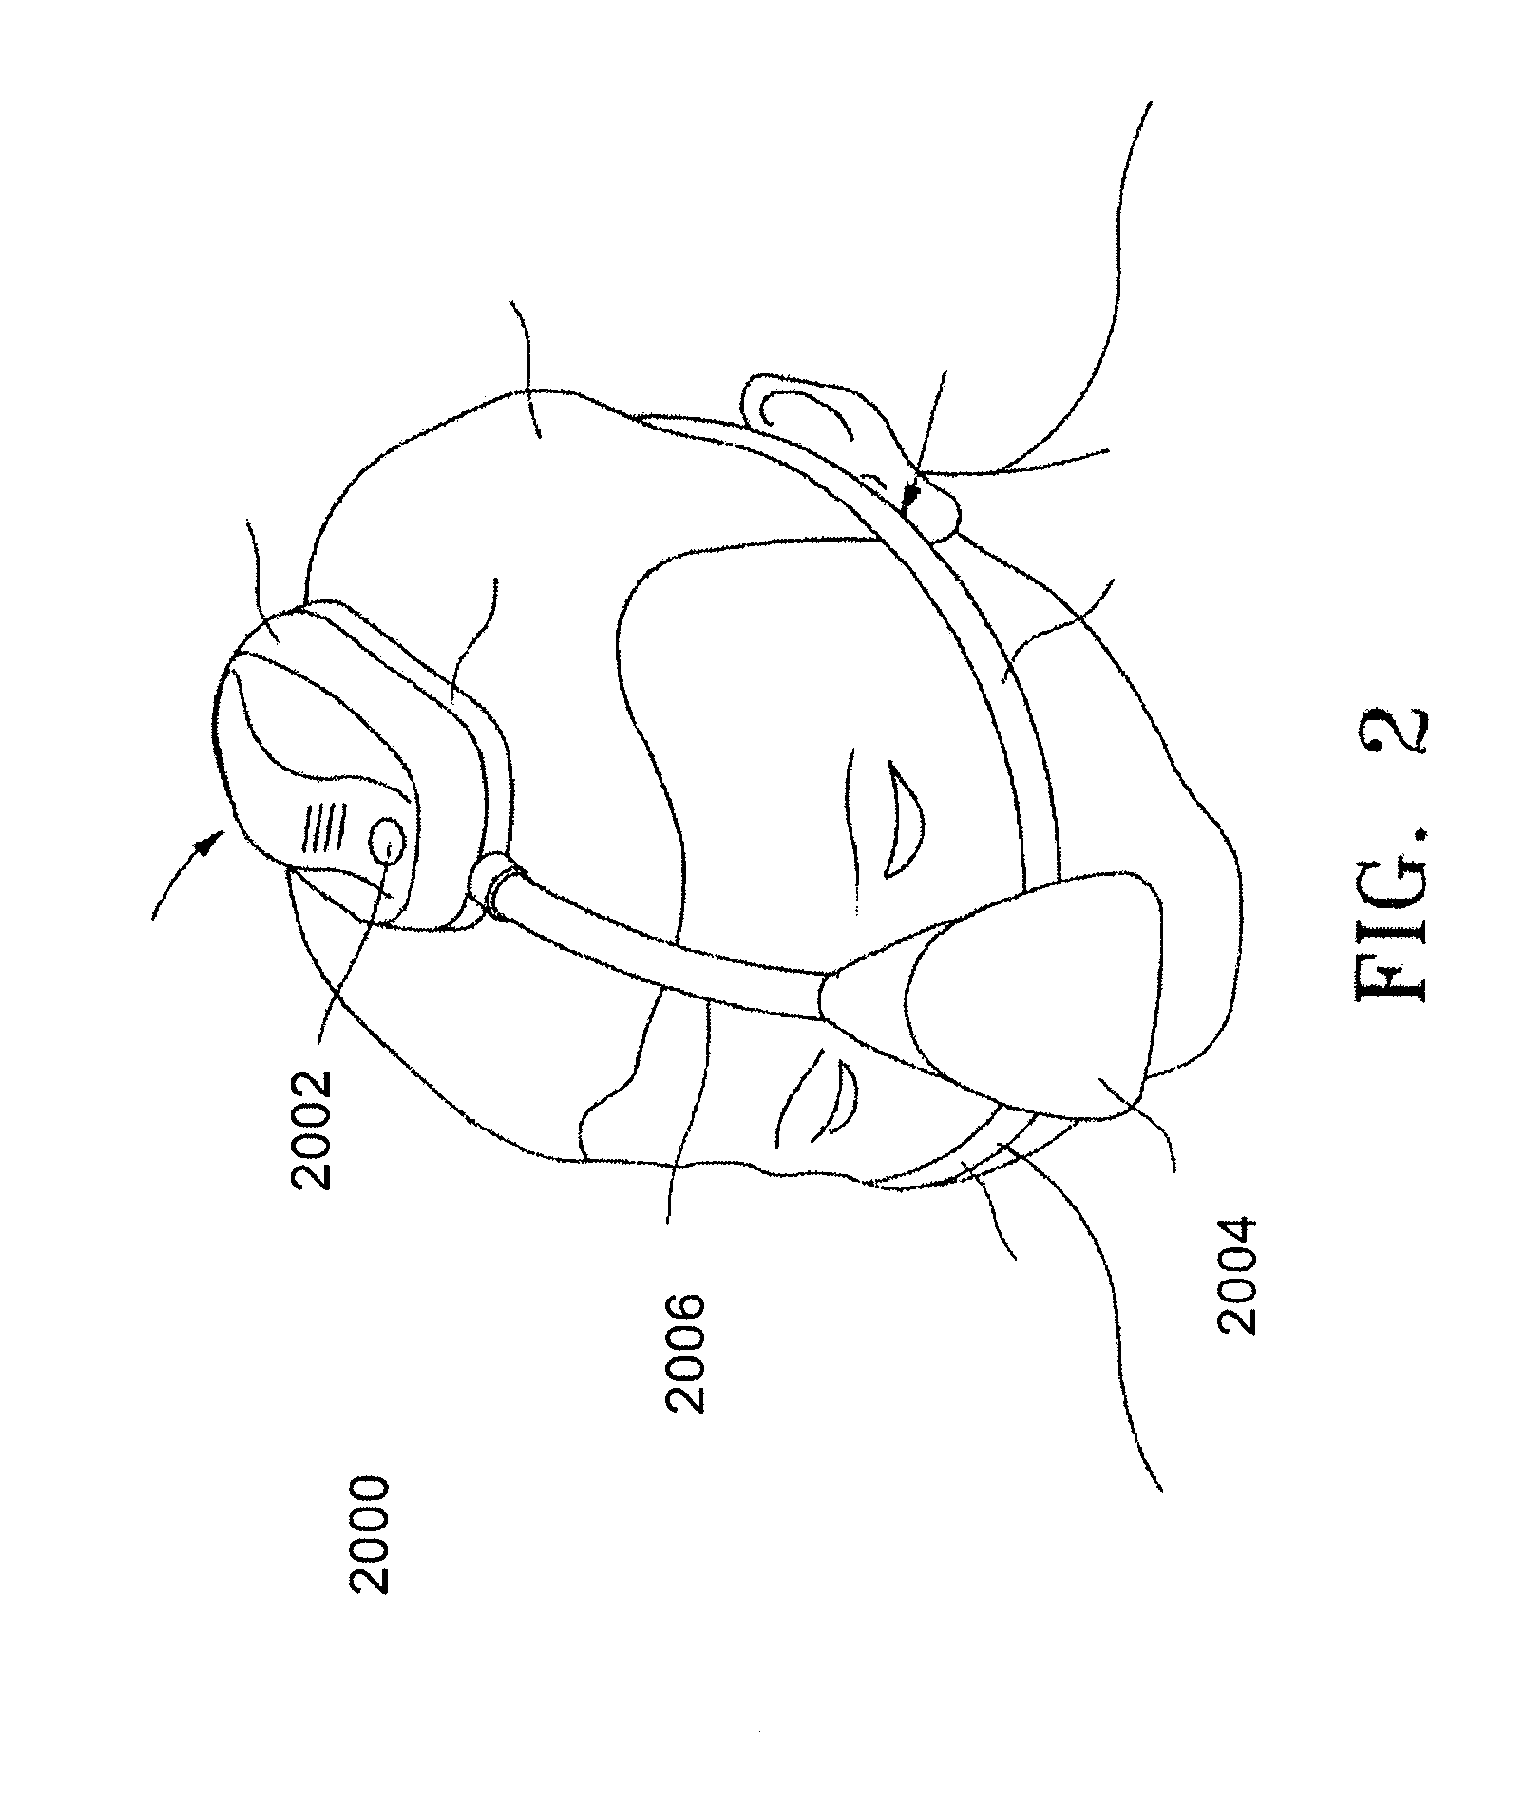 Position control devices and methods for use with positive airway pressure systems